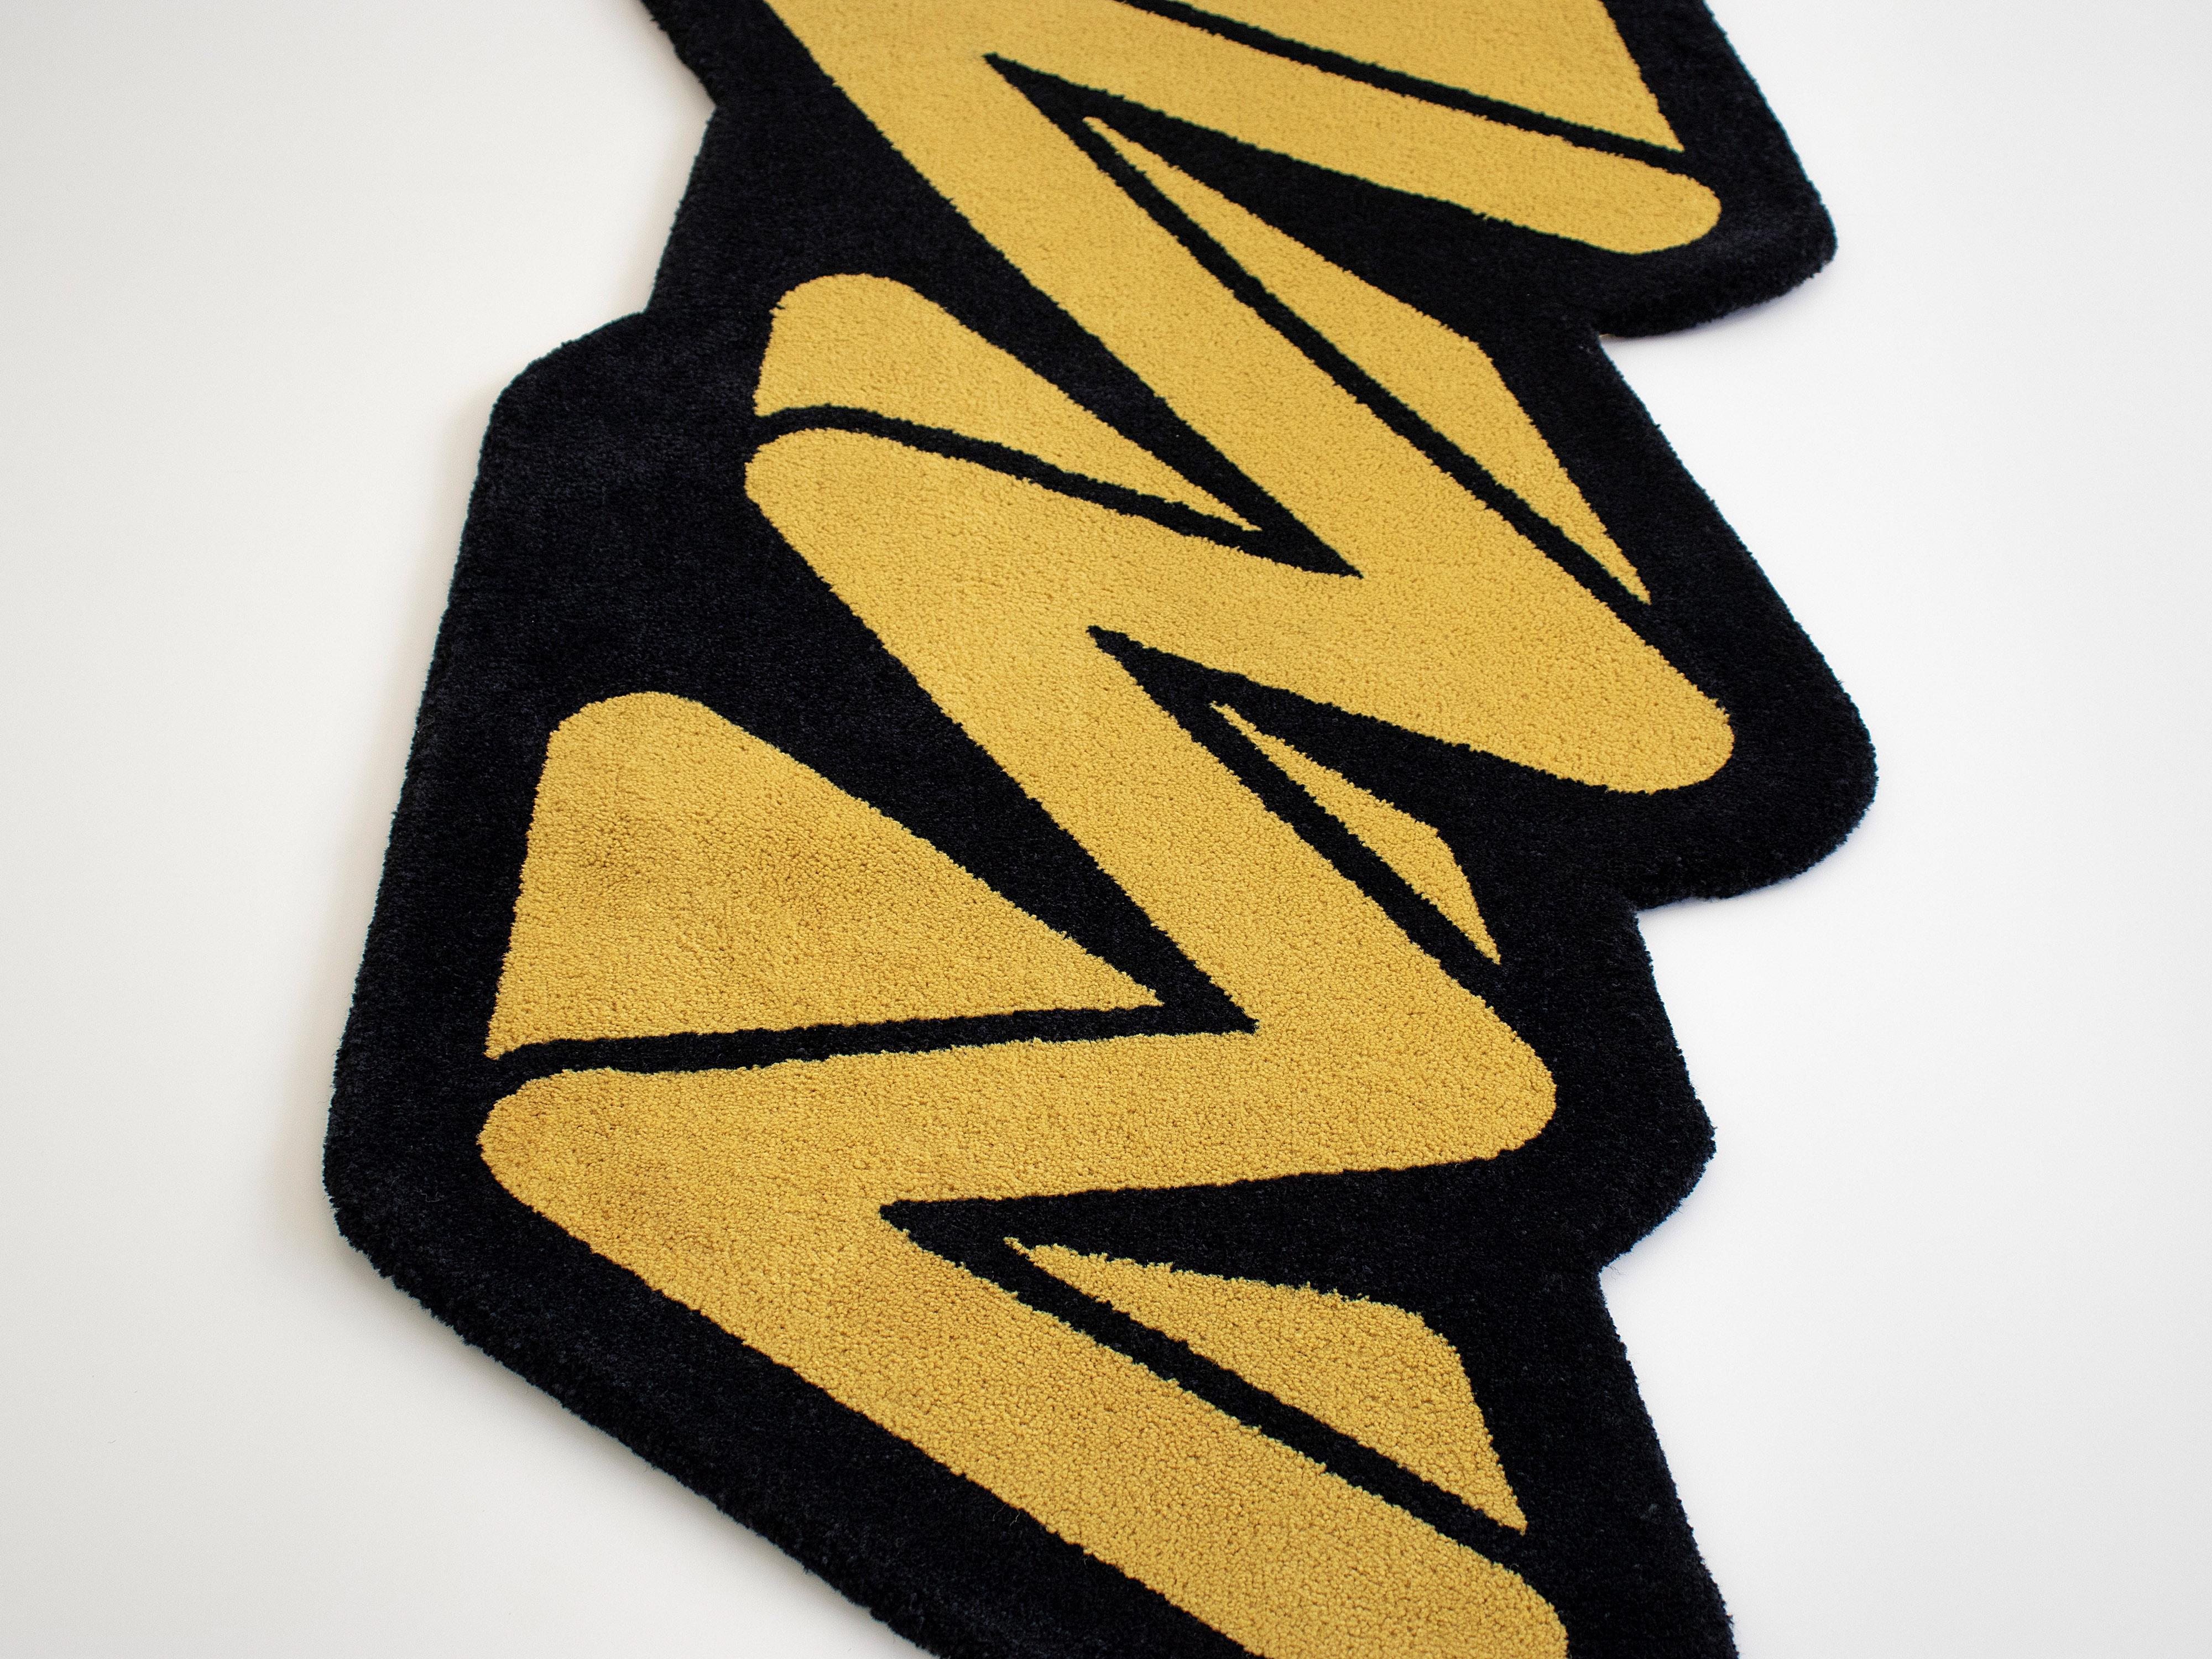 Nylon Playful Yellow Zigzag Runner Rug from Graffiti Collection by Paulo Kobylka